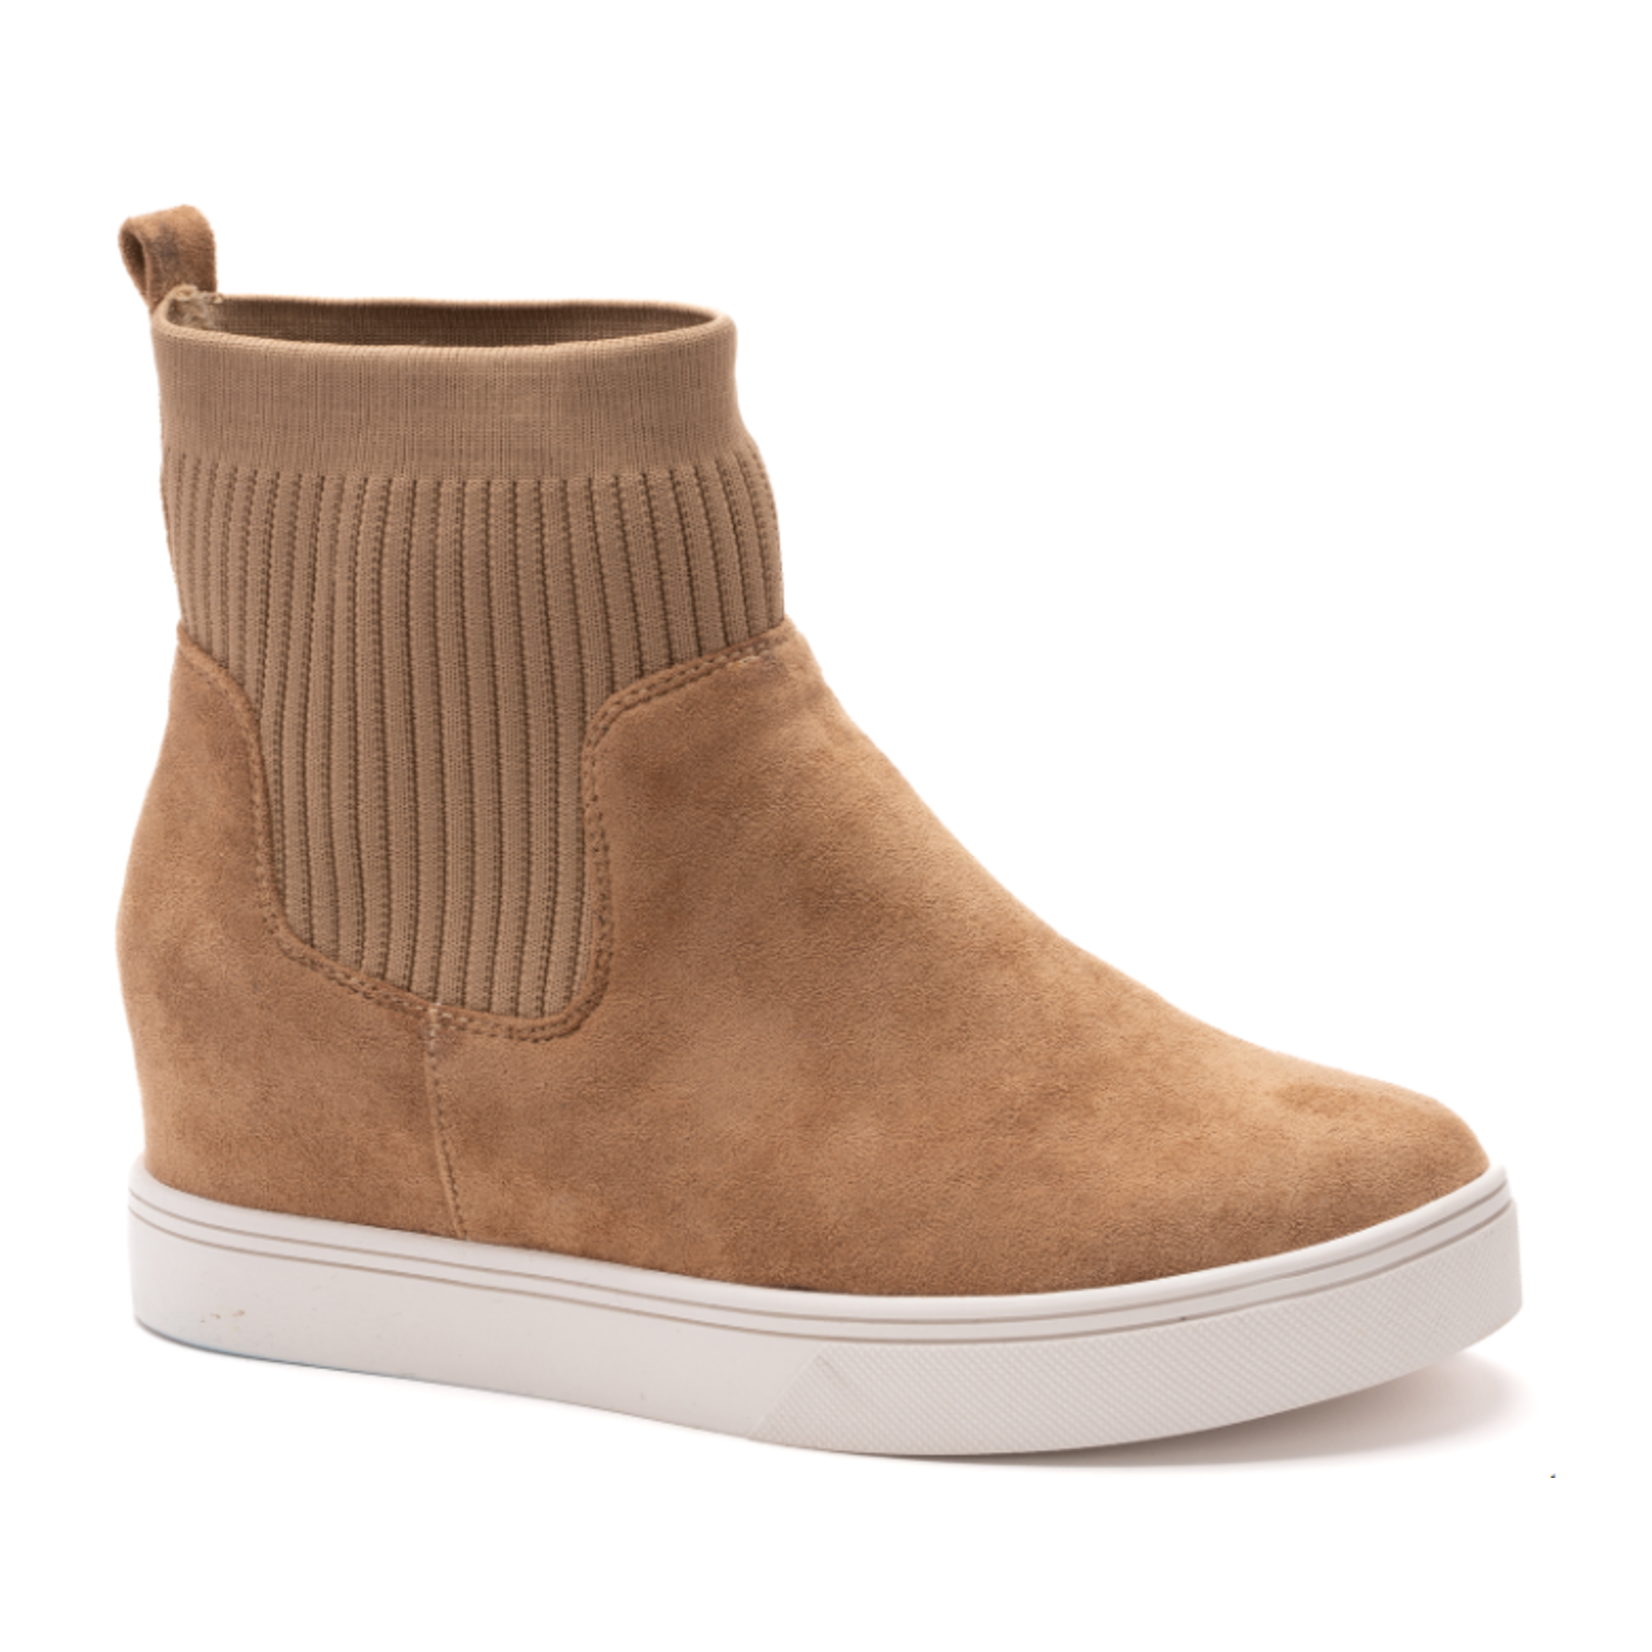 Corkys Corkys Sweater Weather Boots Camel